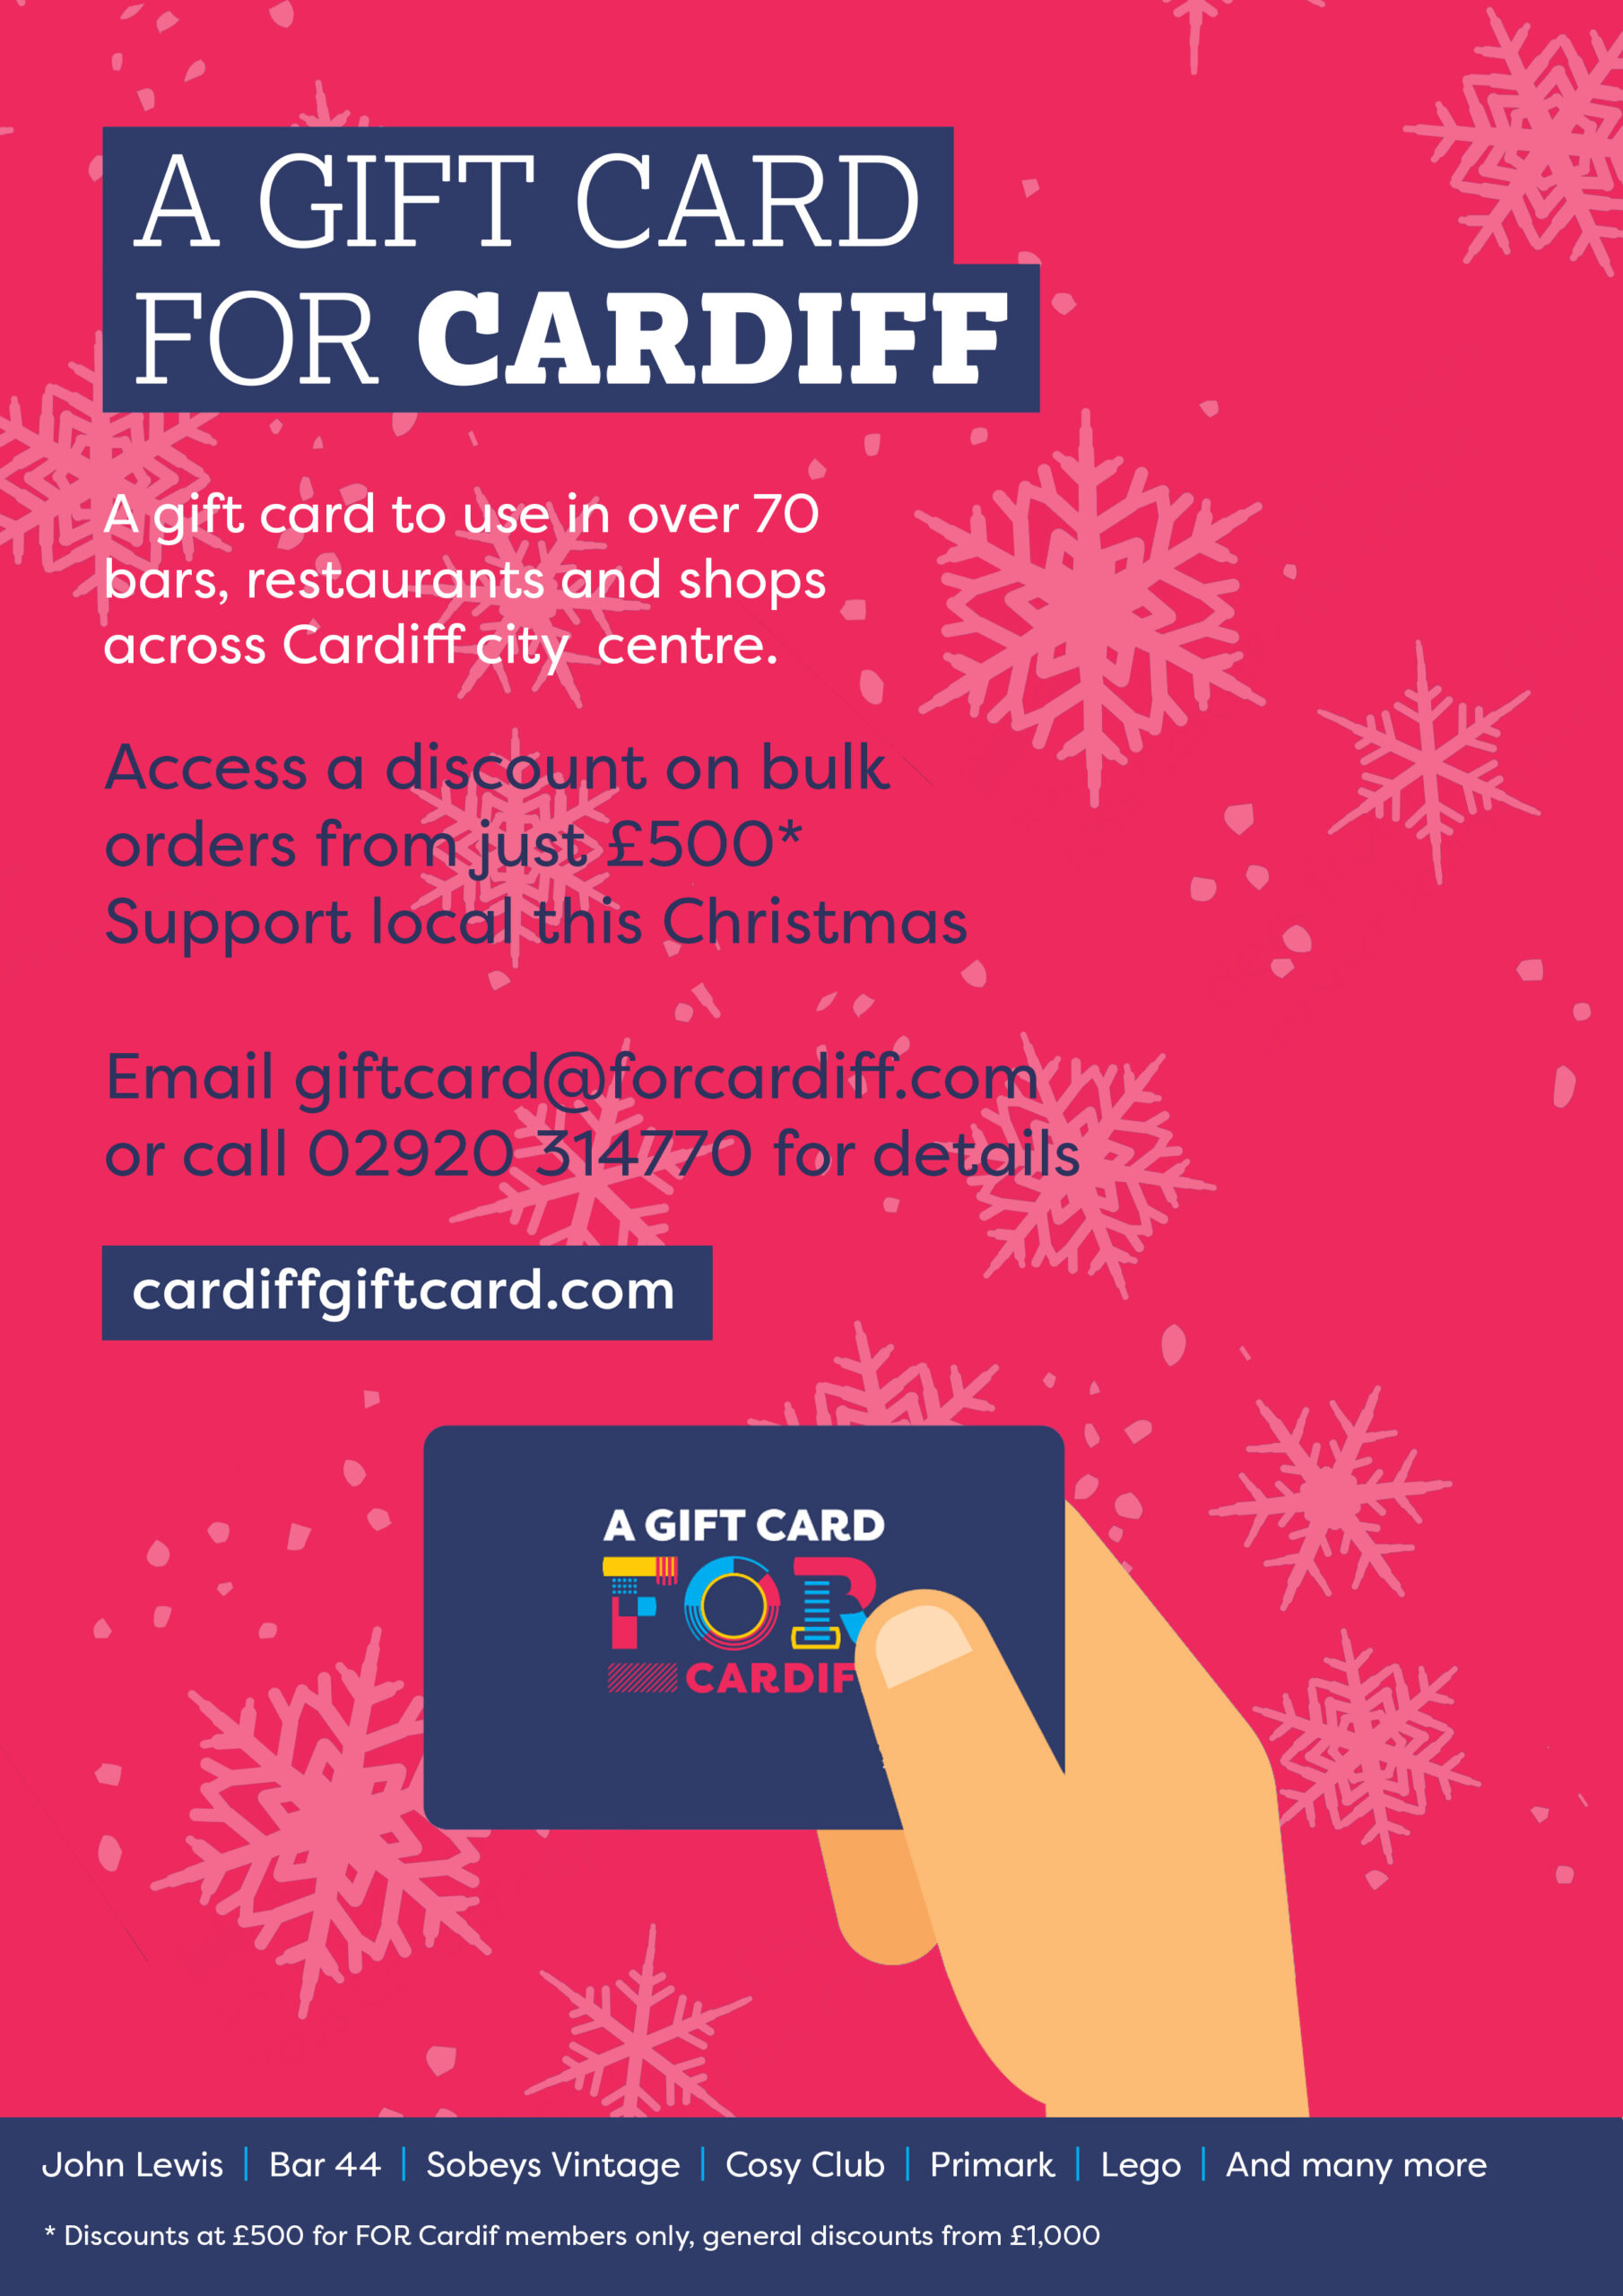 Corporate Gift Card Discounts - FOR Cardiff